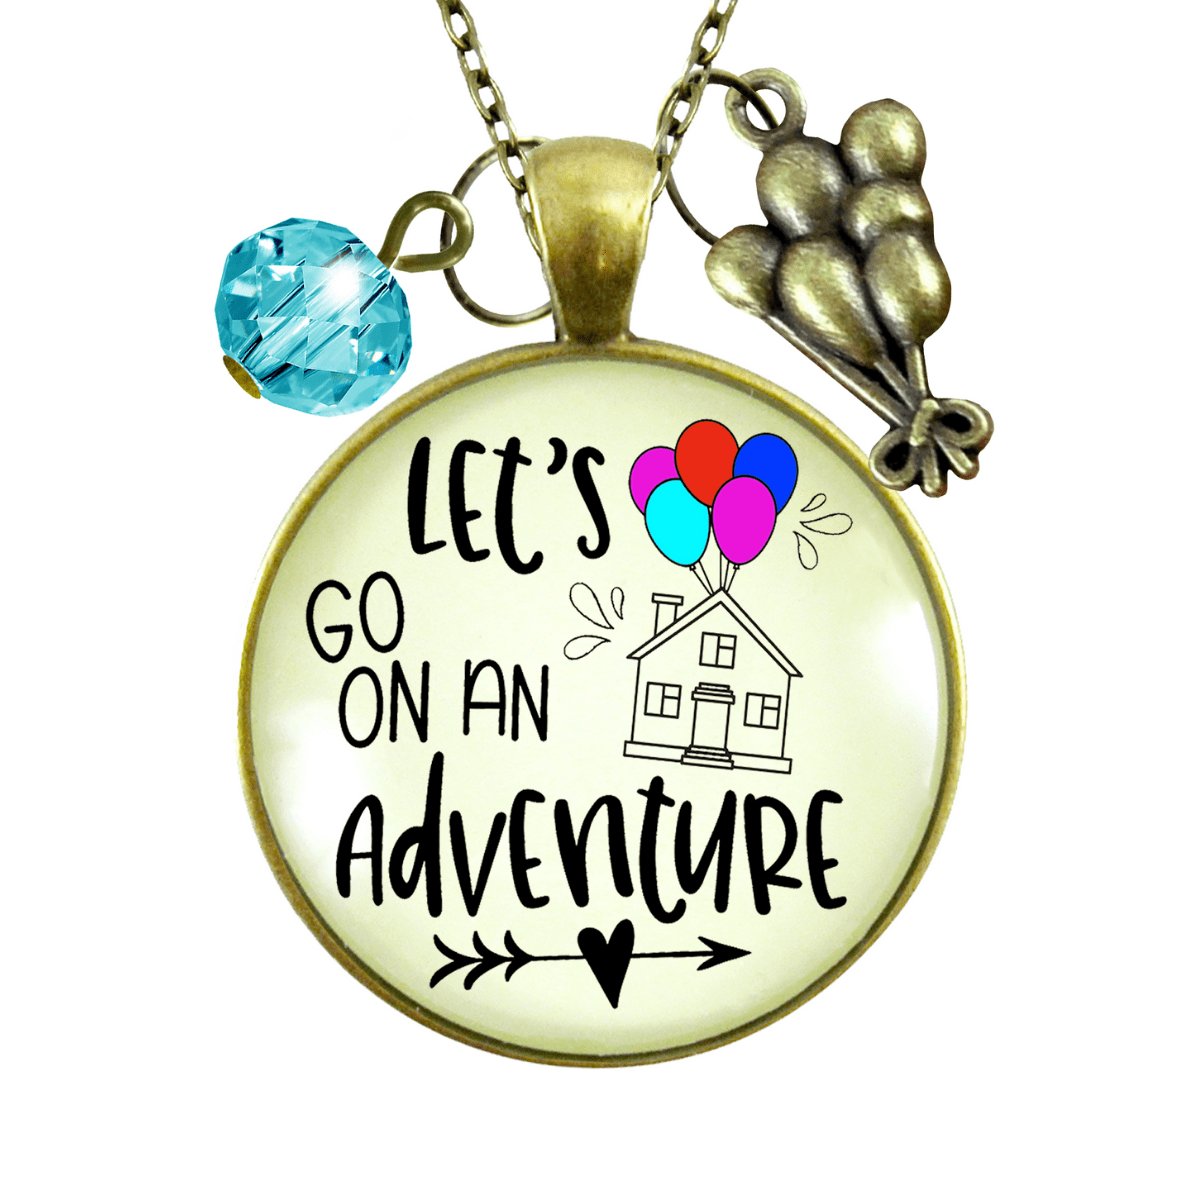 Gutsy Goodness Let's Go on an Adventure Necklace Balloon House Charm Trip Key Ring - Gutsy Goodness Handmade Jewelry;Let's Go On An Adventure Necklace Balloon House Charm Trip Key Ring - Gutsy Goodness Handmade Jewelry Gifts